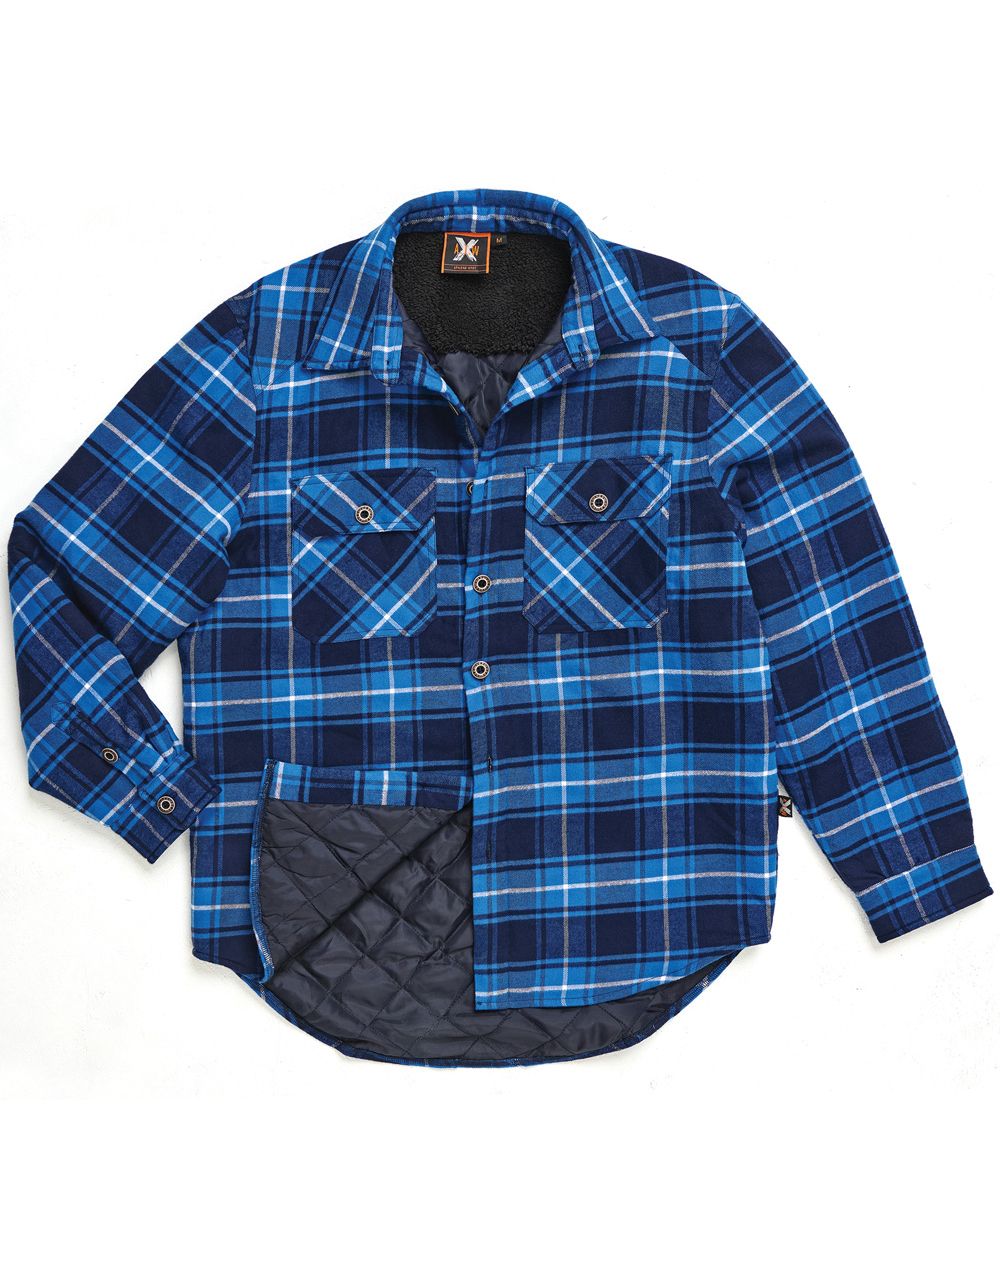 WT07 UNISEX QUILTED FLANNEL SHIRT-STYLE JACKET - Workwearlink & Embroidery